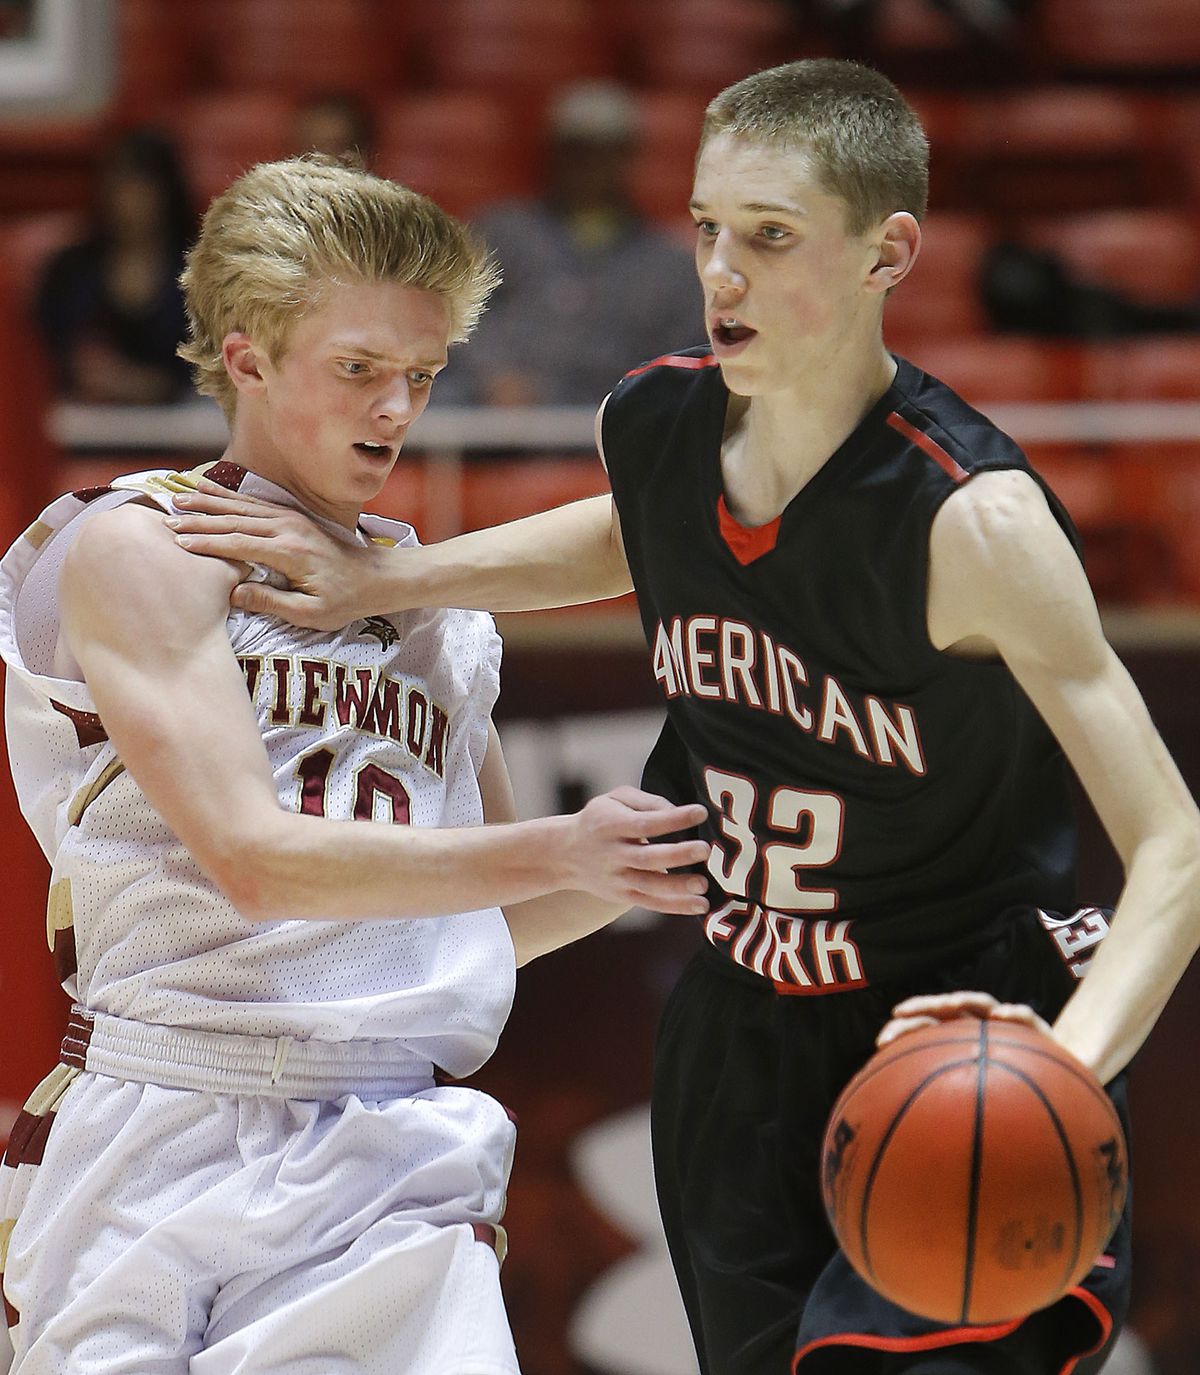 Viewmont’s Matt Stringham works to defend Spencer Johnson as American Fork and Viewmont play Tuesday, March 4, 2014 in the Huntsman Center at the University of Utah.